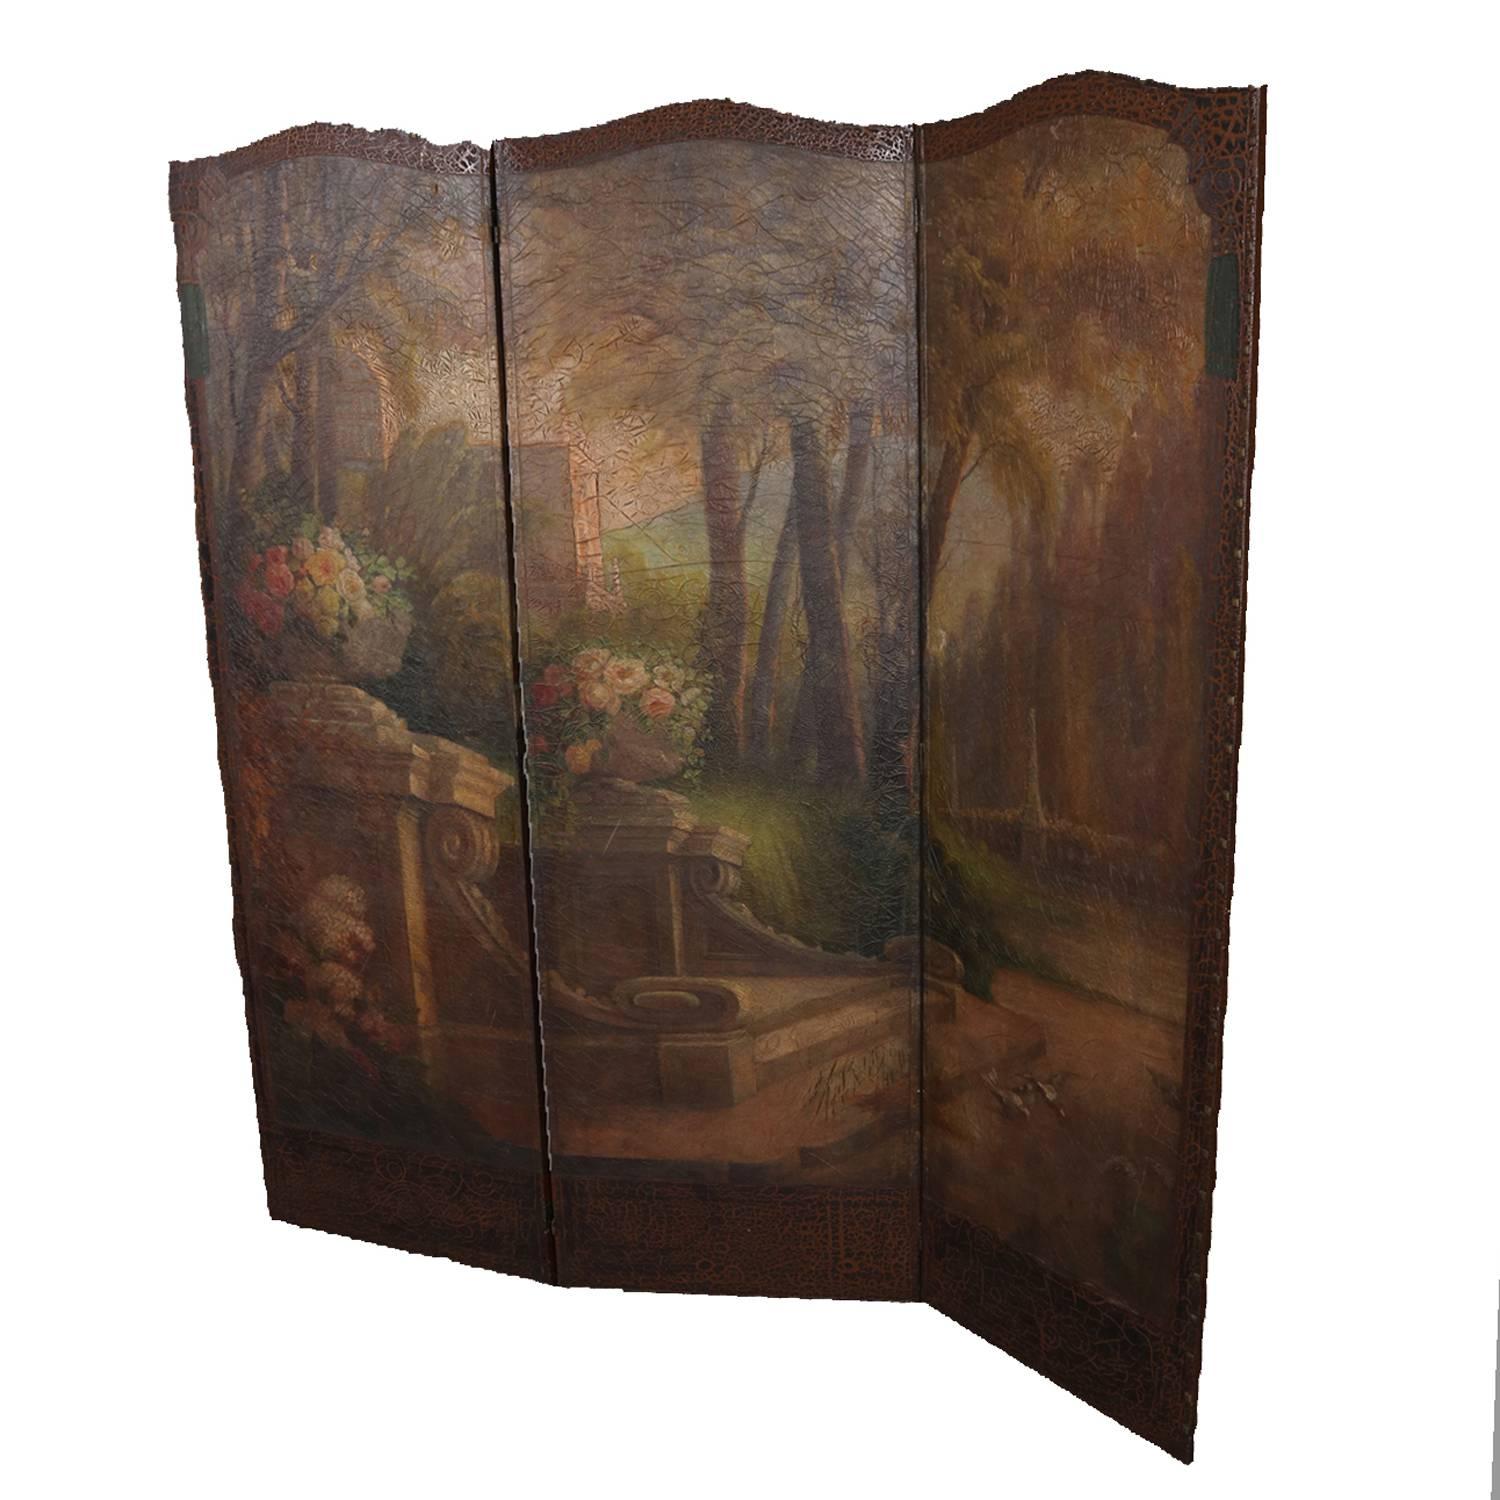 Antique French Louis XVI style dressing or dividing screen features three panels with continuous hand painted landscape garden screen on leather and attached with bronze brads, circa 1880

Measures: 69.5